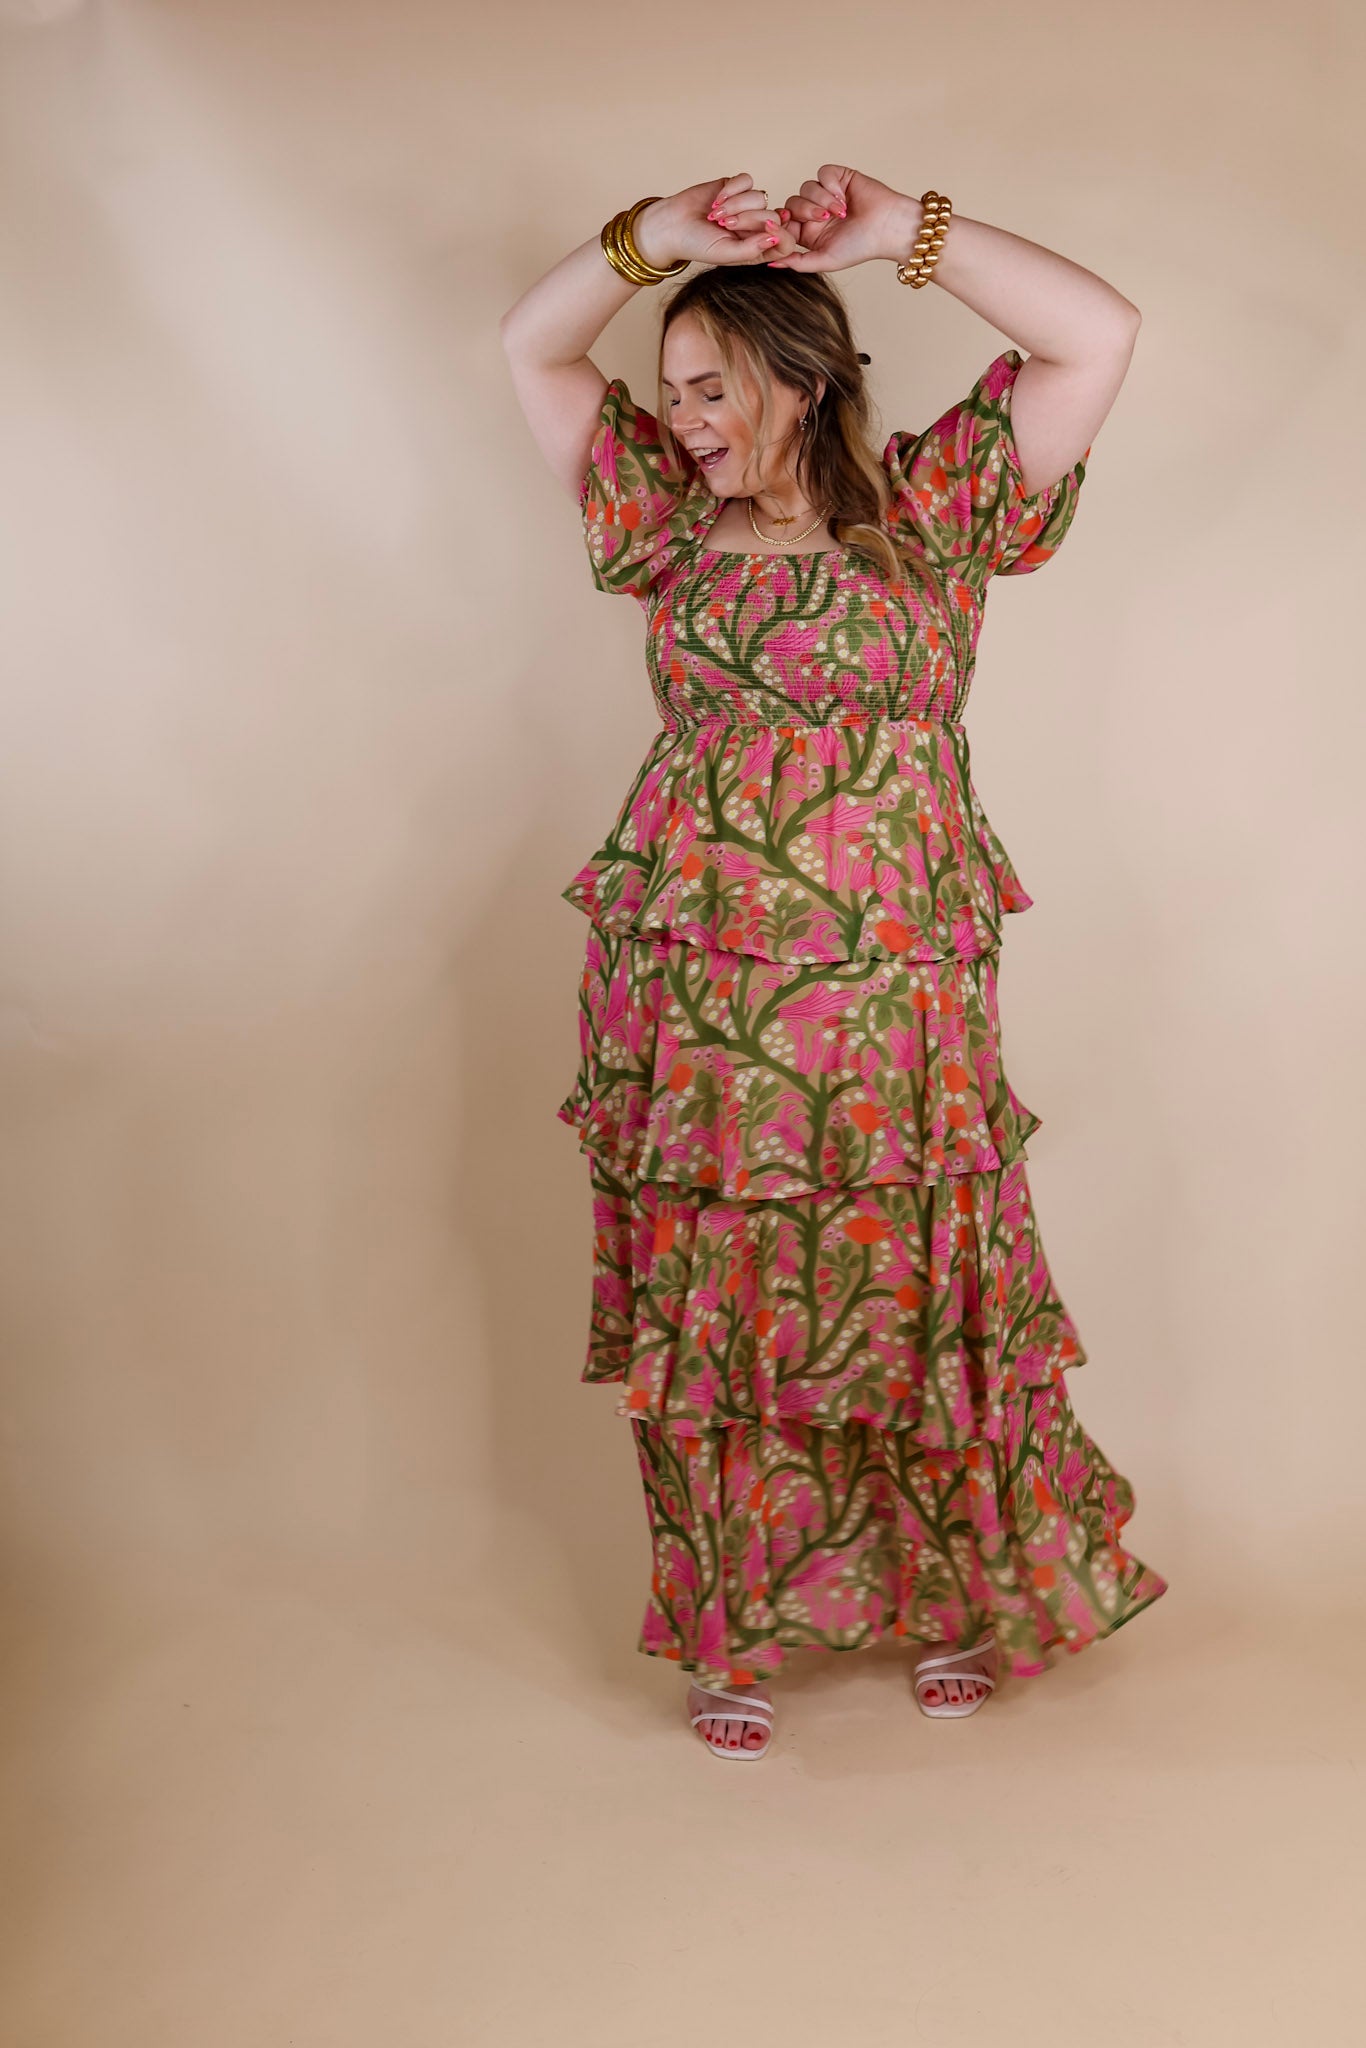 Fun Feeling Floral Tiered Maxi Dress with Smocked Balloon Sleeves in Green Mix - Giddy Up Glamour Boutique